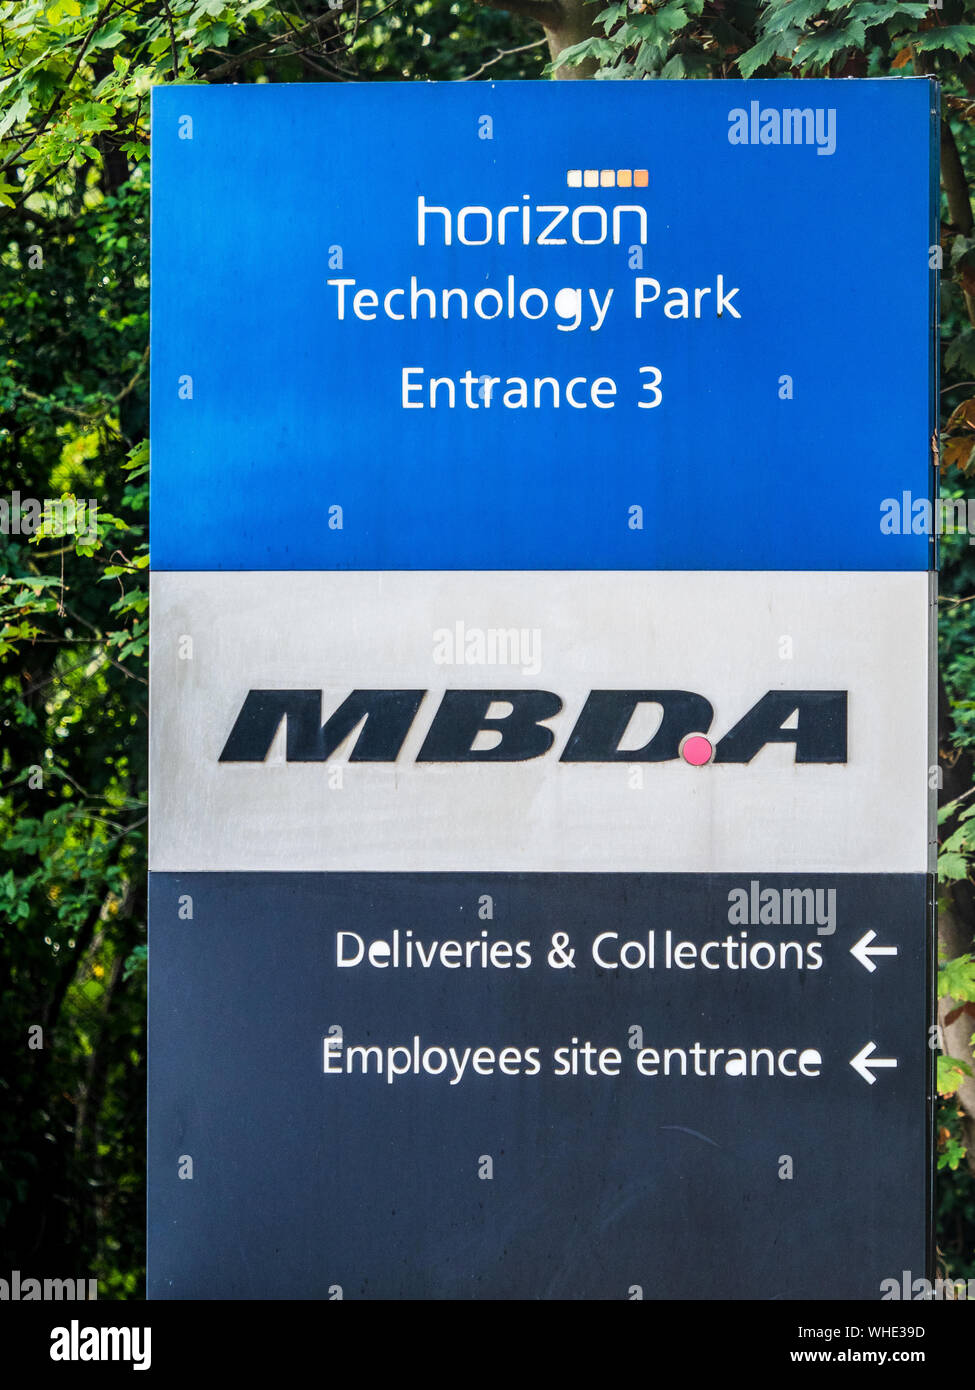 MBDA entrance sign in Stevenage UK. MBDA is a missile manufacturer formed by a merger of guided missile divisions of Airbus, Leonardo and BAE Systems. Stock Photo